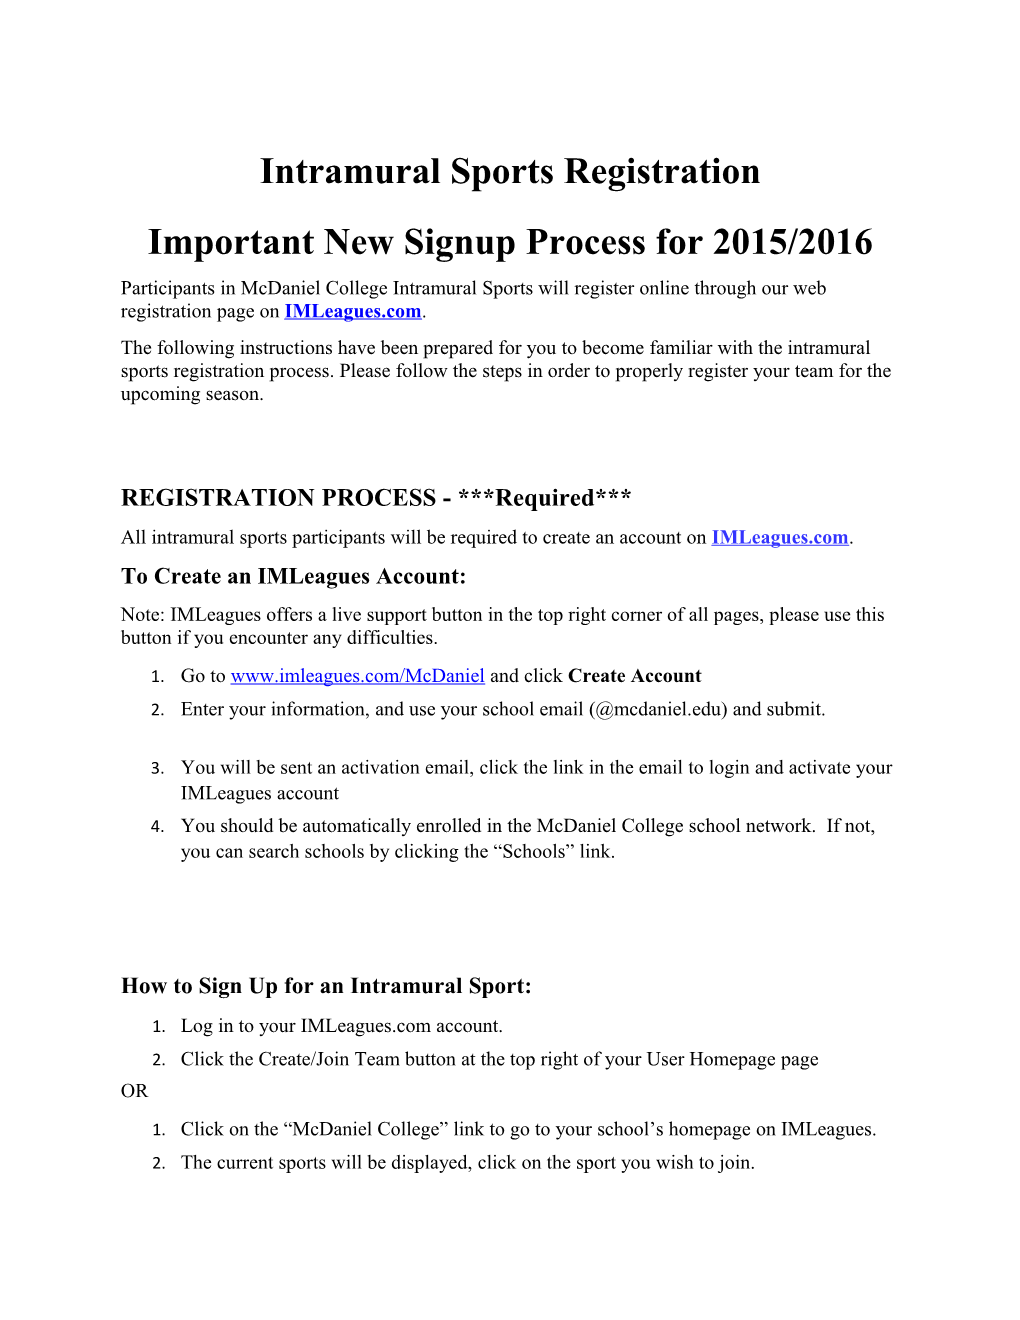 Important New Signup Process for 2015/2016